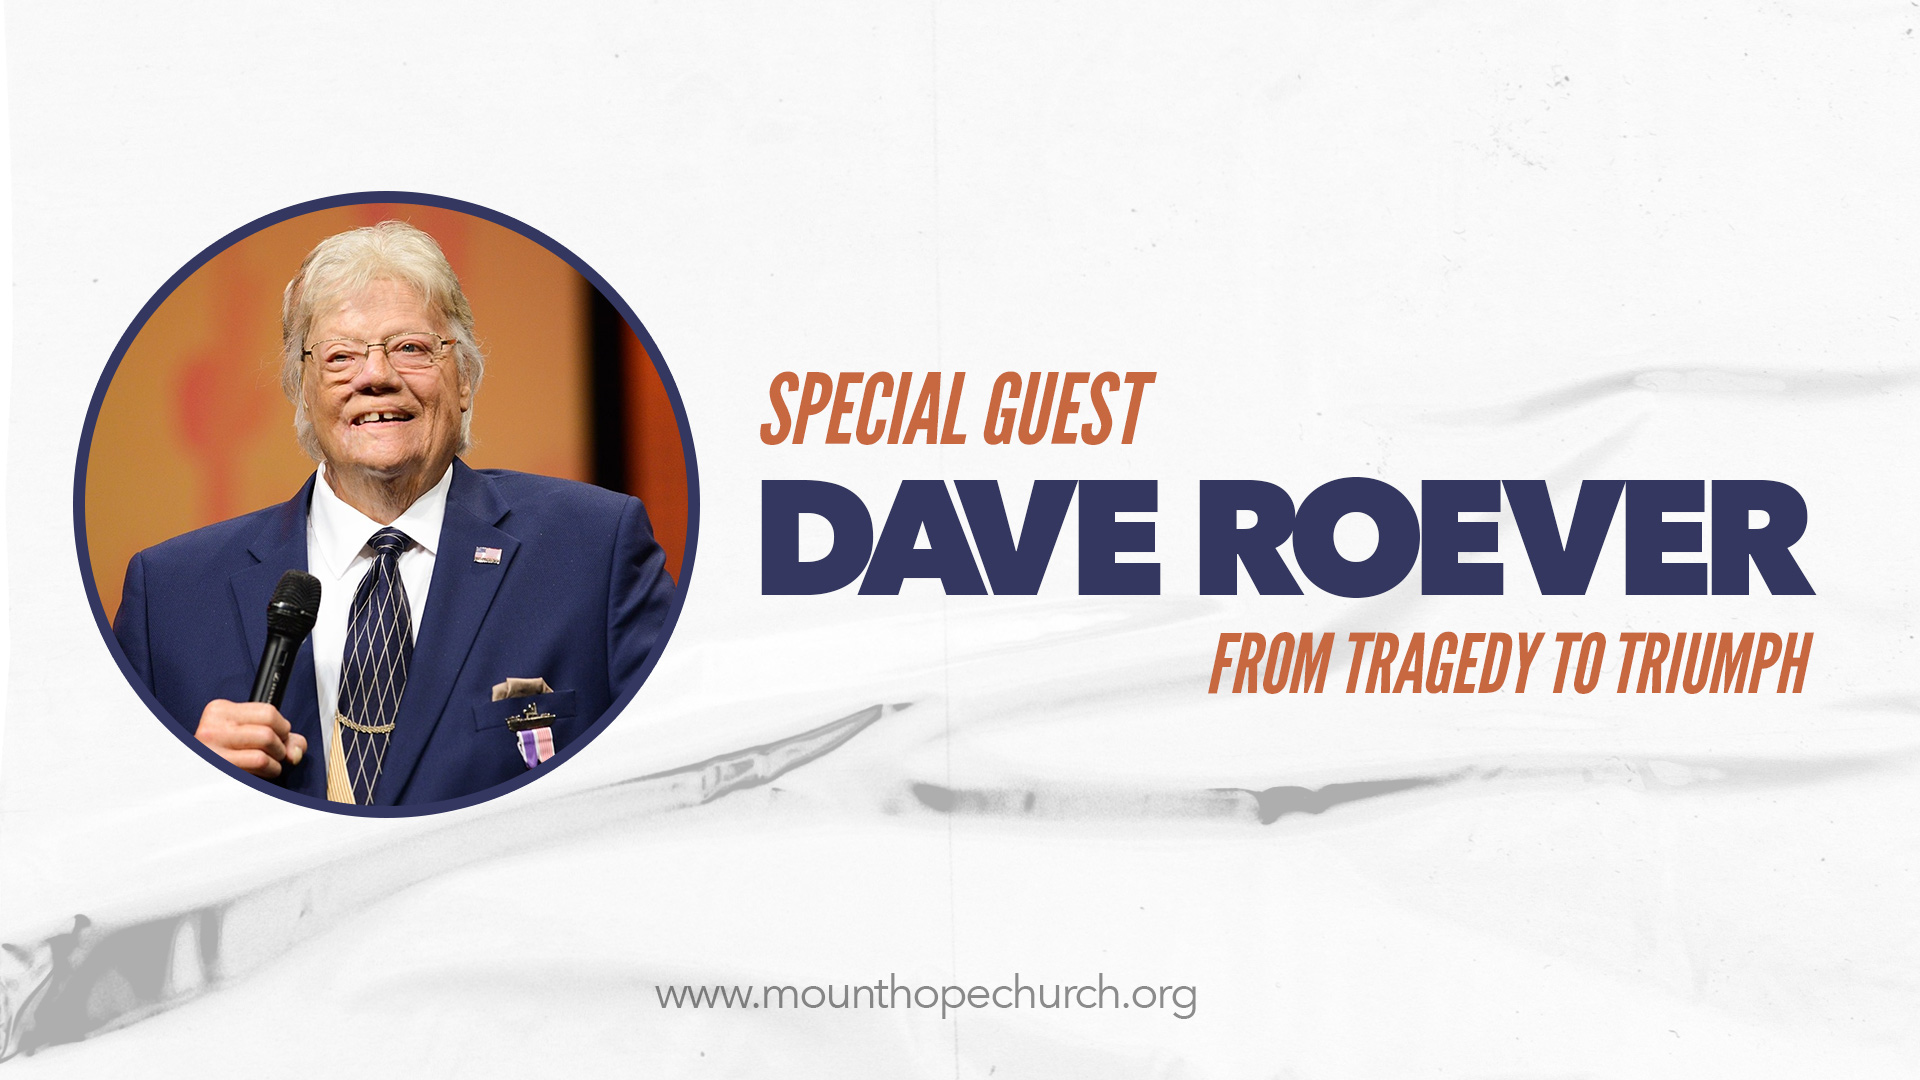 Special Guest Dave Roever, From Tragedy to Triumph